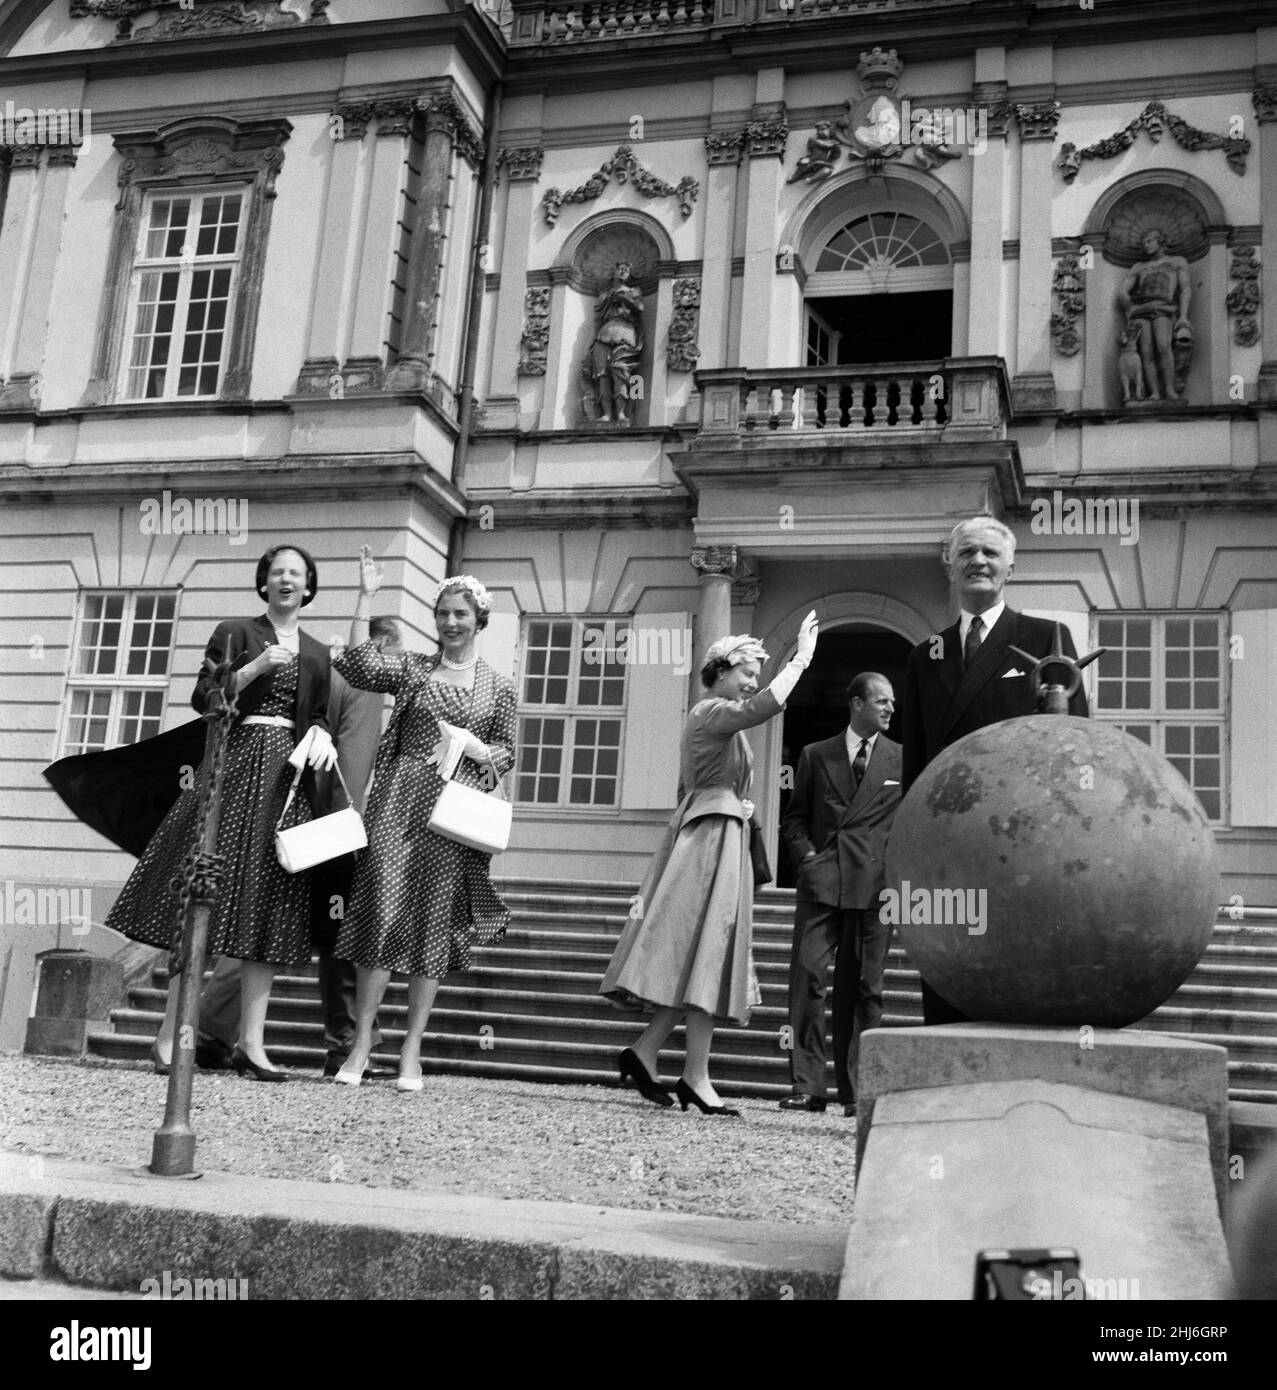 Queen Elizabeth II and Prince Philip, Duke of Edinburgh during their state visit to Denmark. Pictured at Hermitage Hunting Lodge, Princess Margrethe, Queen Ingrid, Queen Elizabeth II and Prince Philip. May 1957. Stock Photo